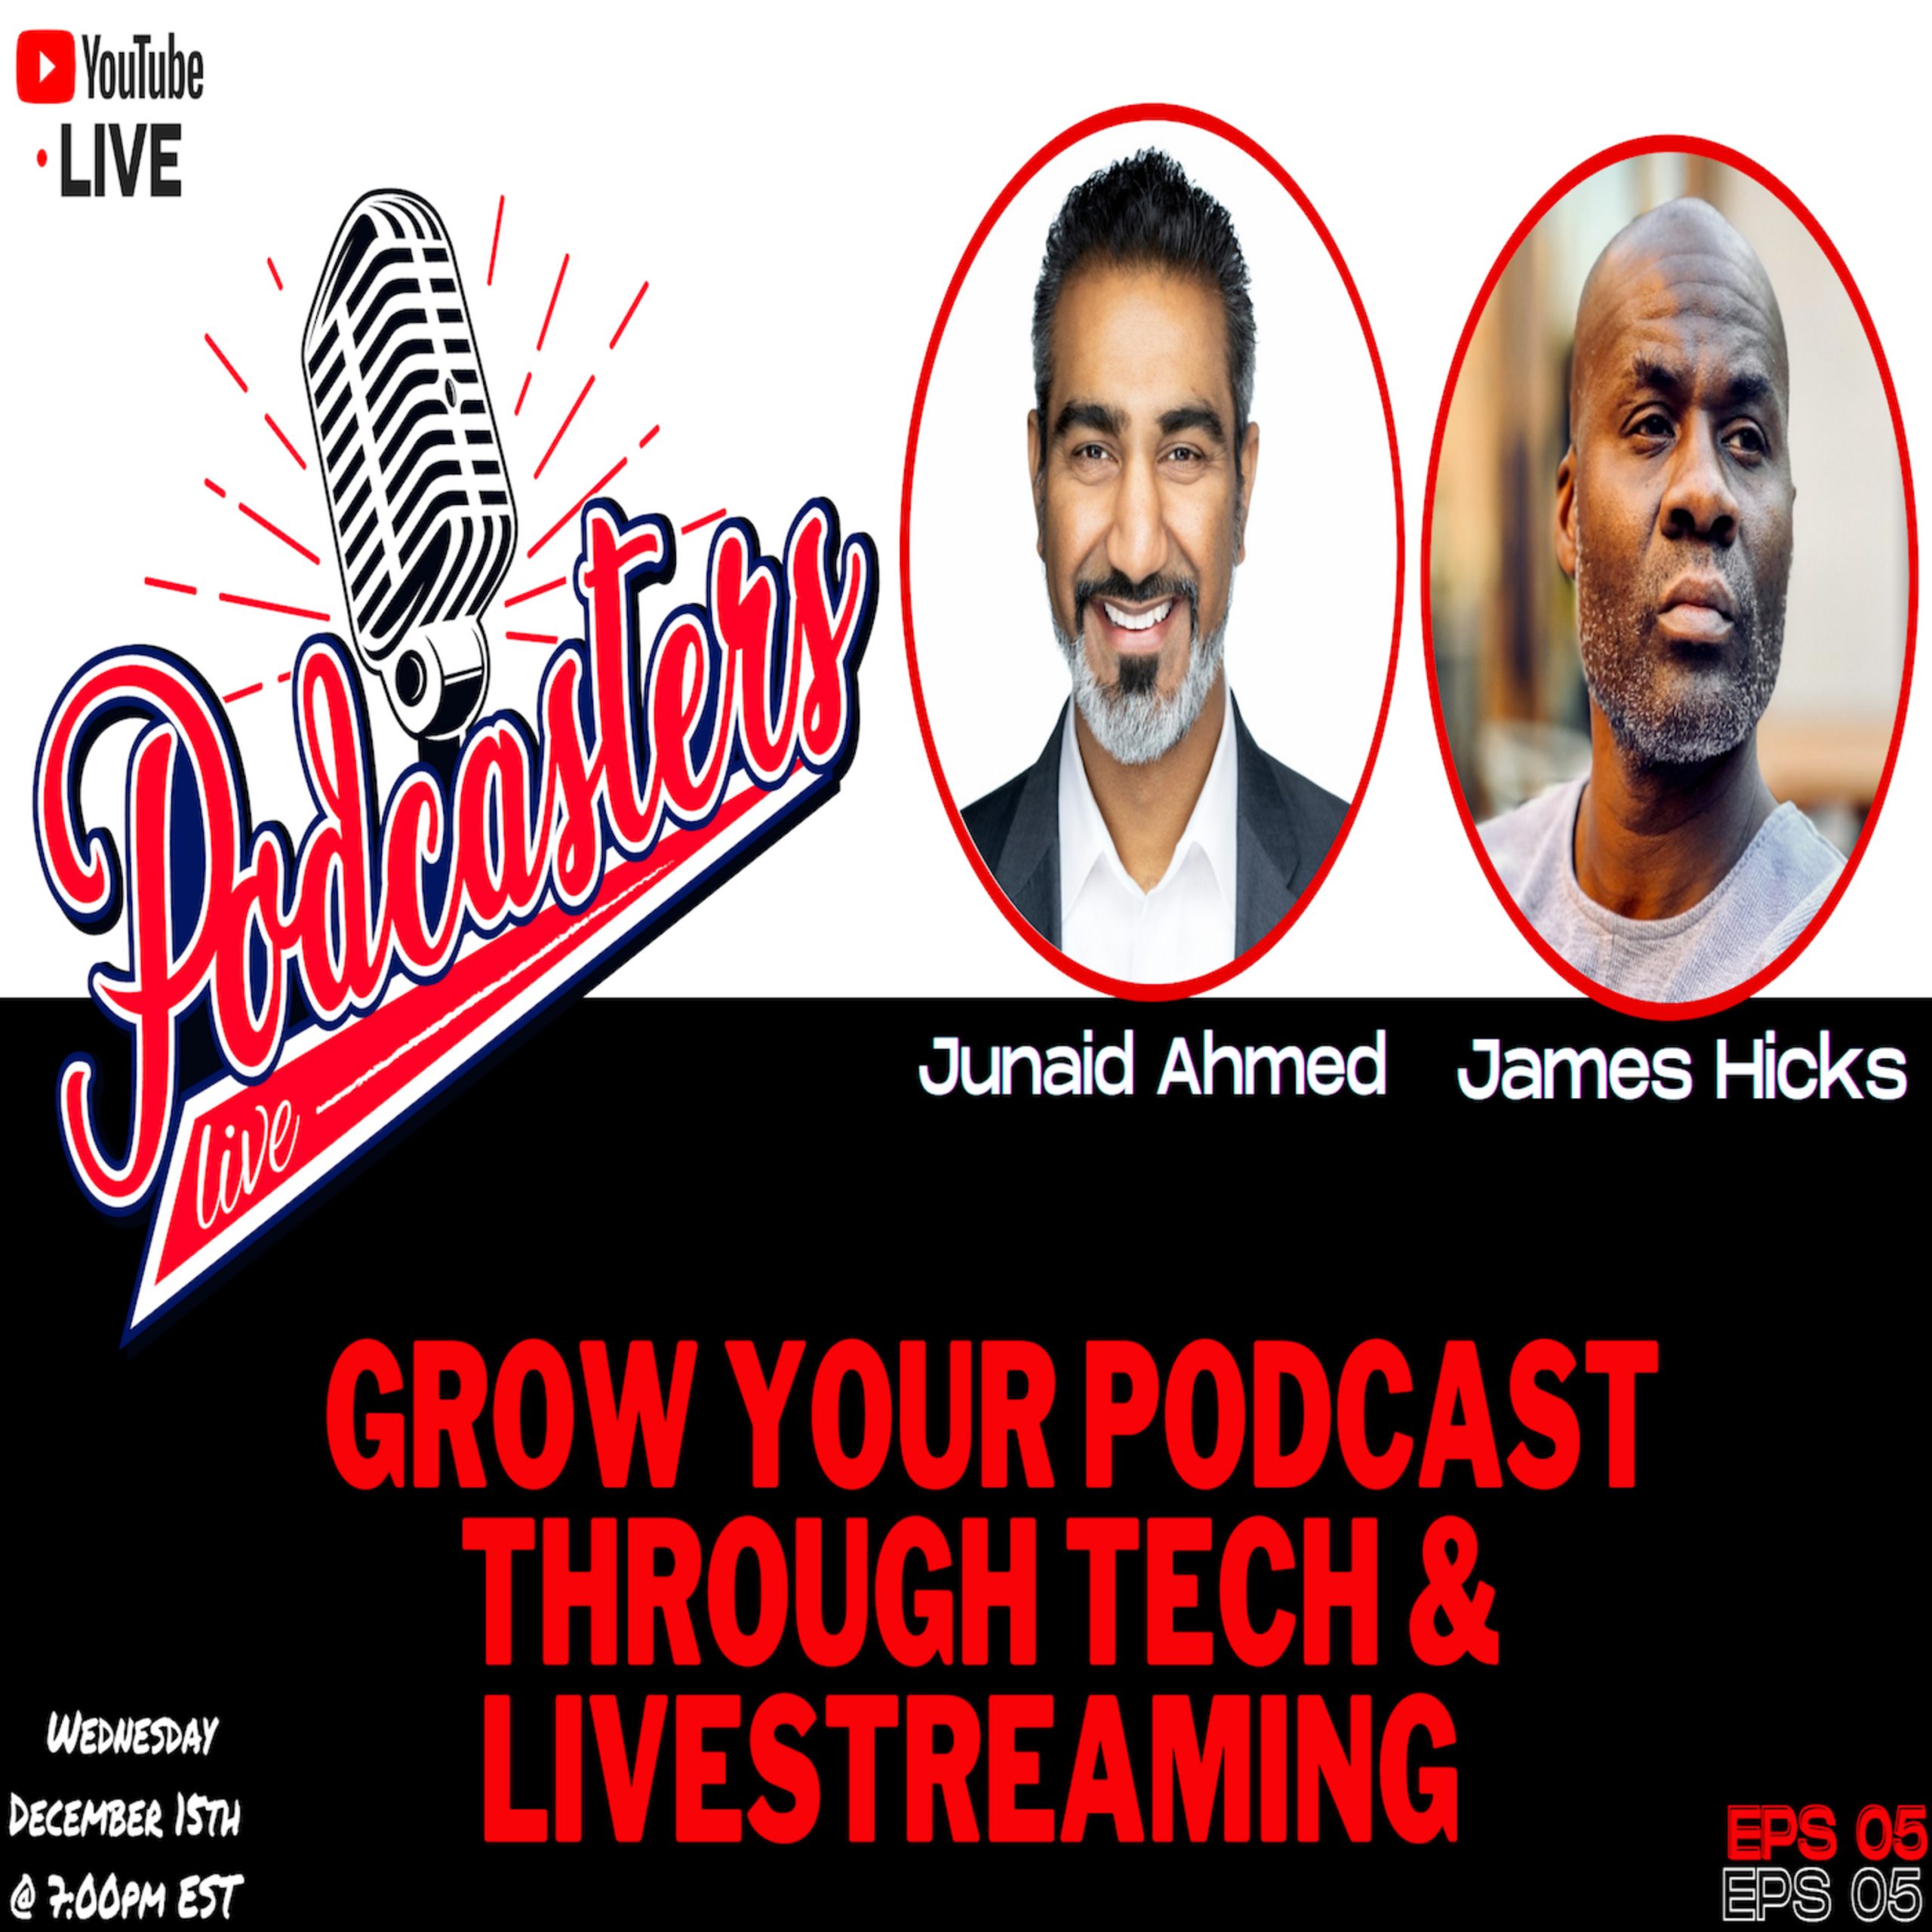 Grow your Podcast with Tech and Livestreaming!